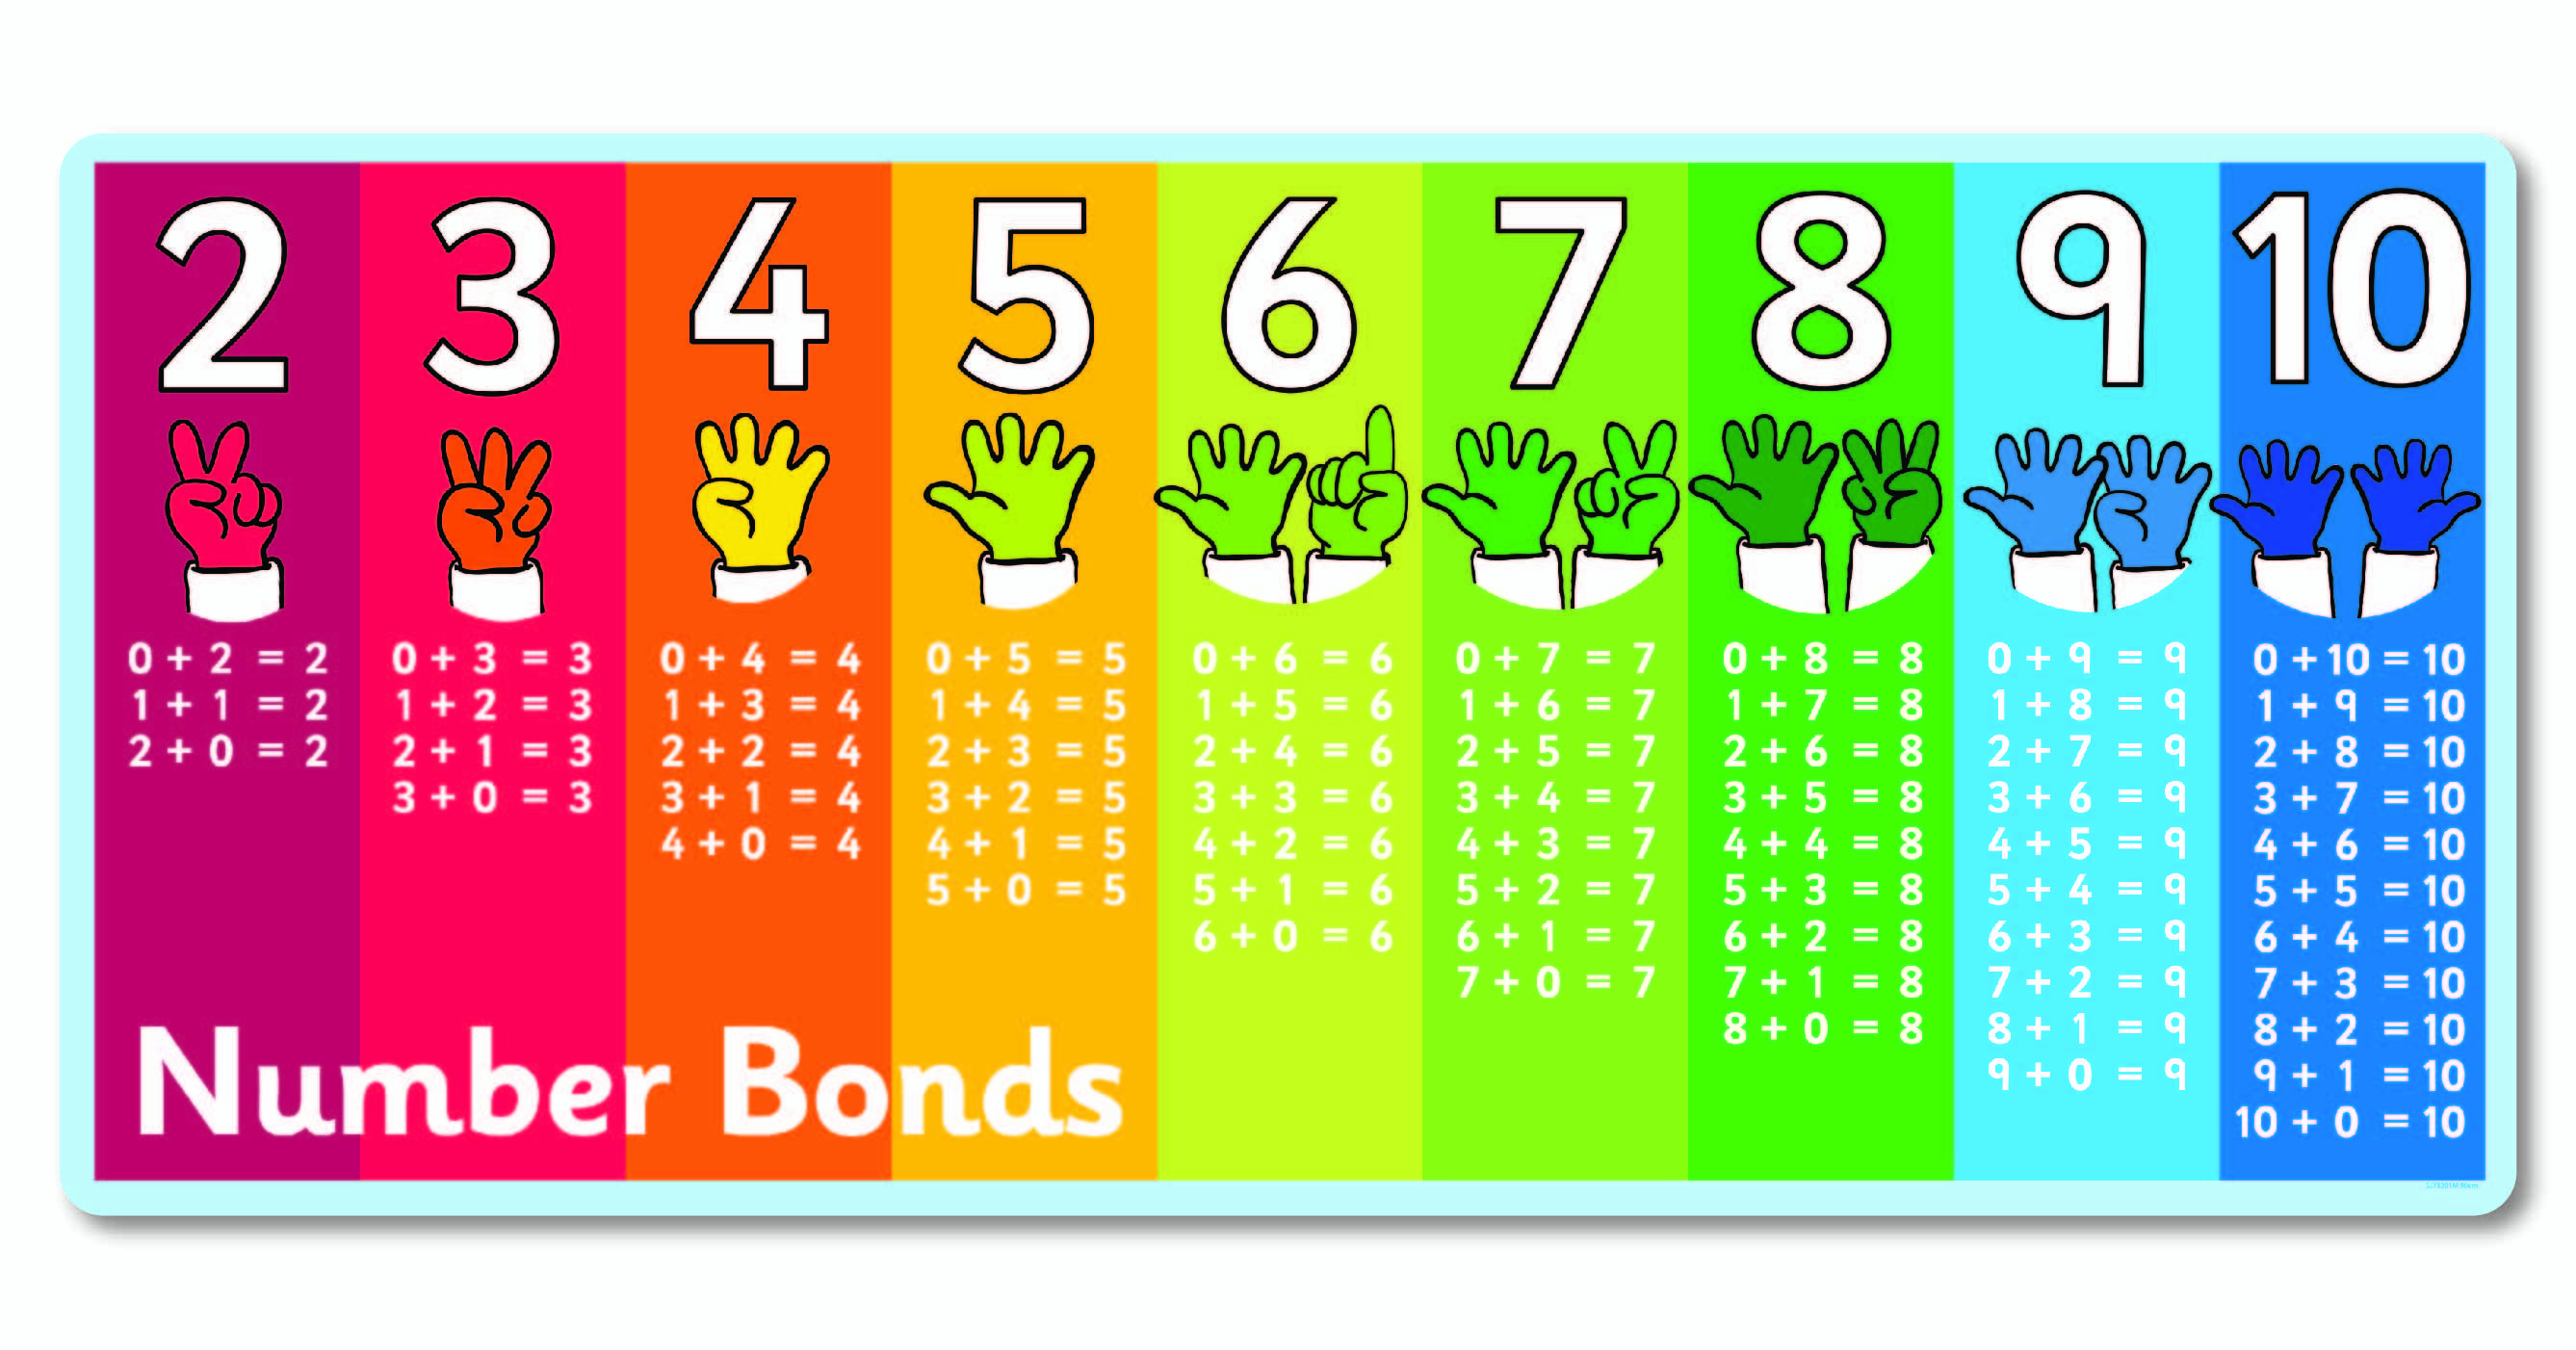 Bonds To 10 Recall Number Bonds To 20 Relate To Number Bonds To 10 Tmubmusd10y A